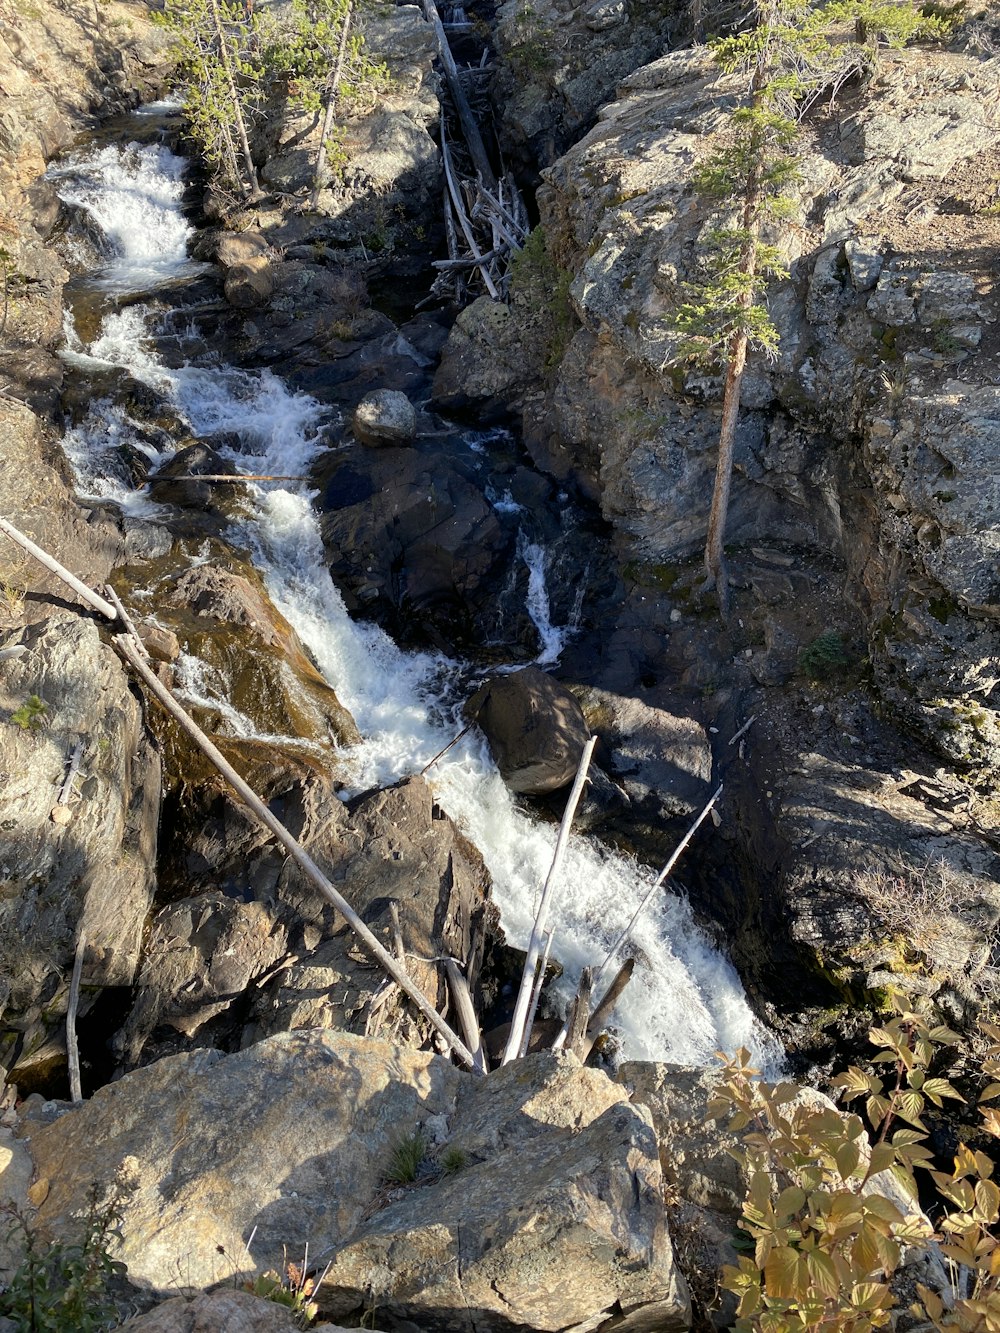 a small waterfall in a rocky area